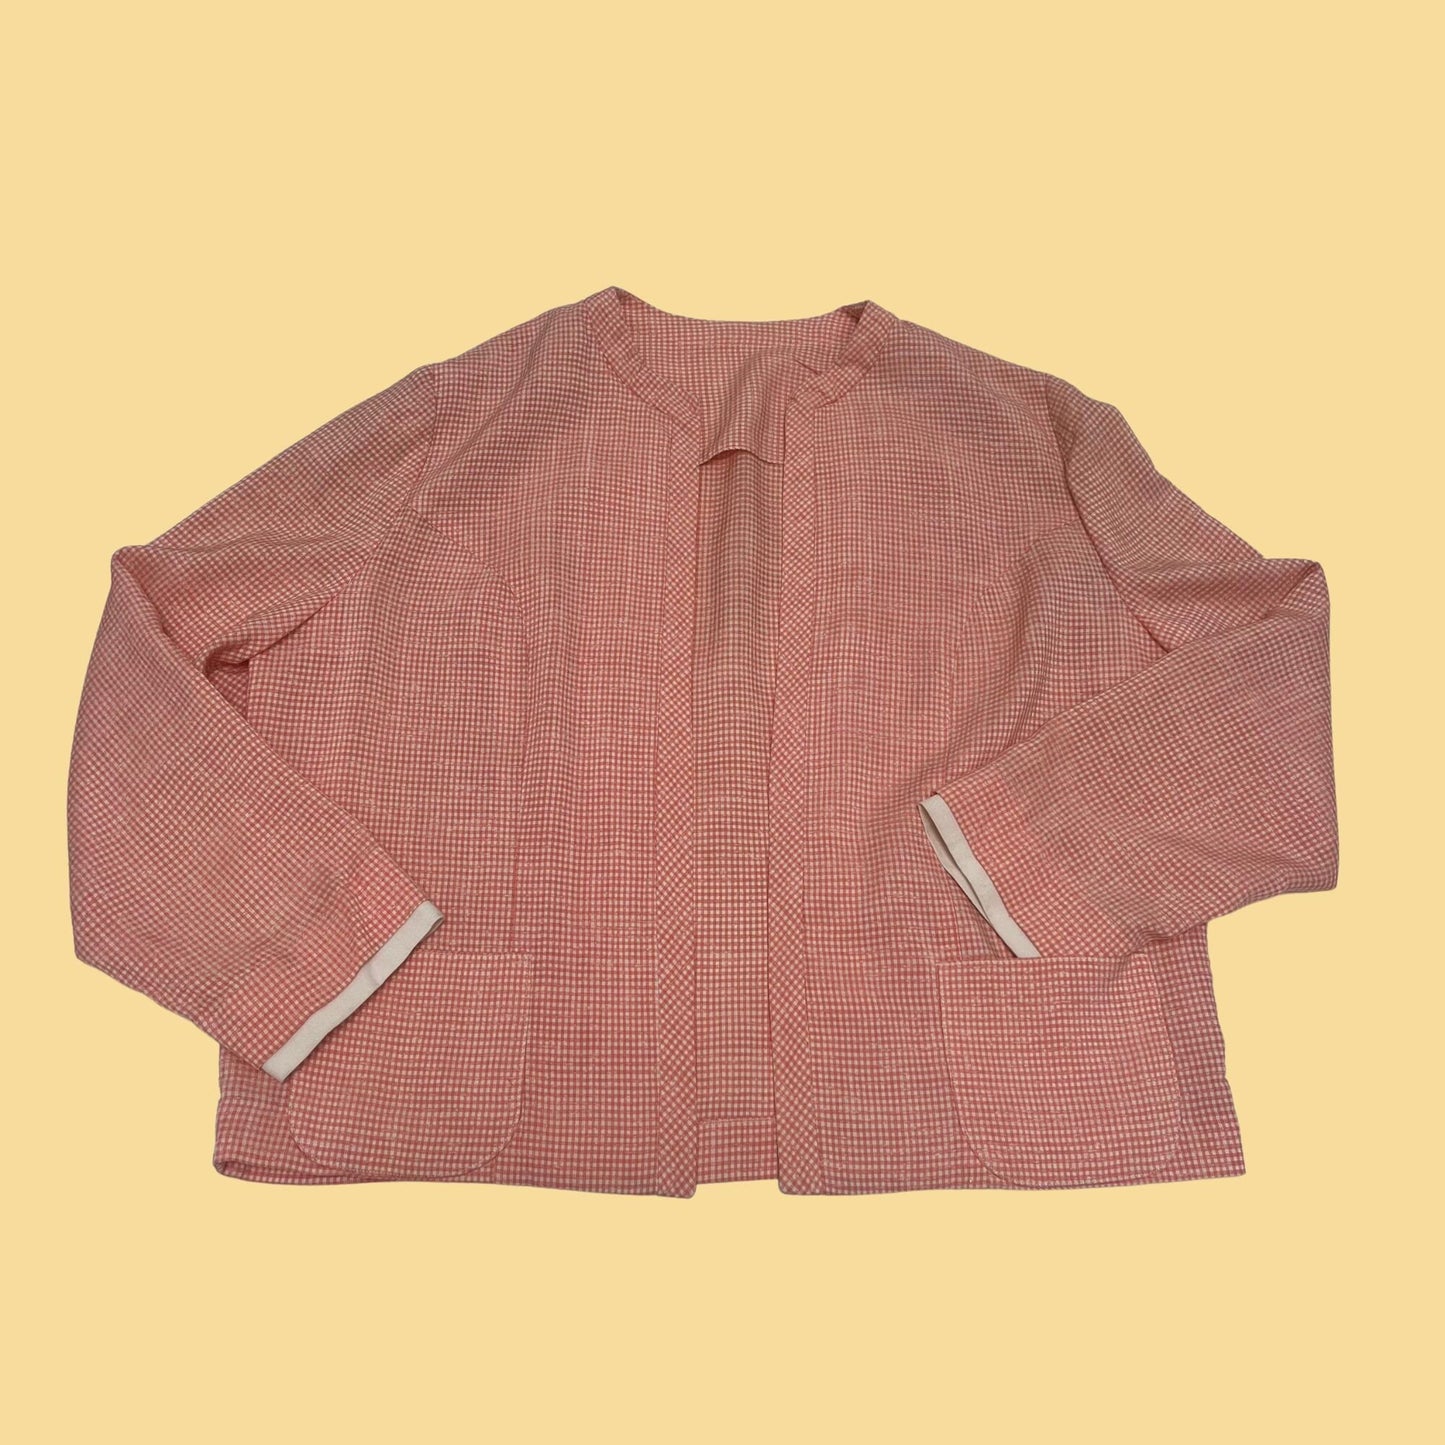 50s David Crystal Fashion pink and white jacket, vintage mod open jacket with front pockets, 1950s women's open front blazer